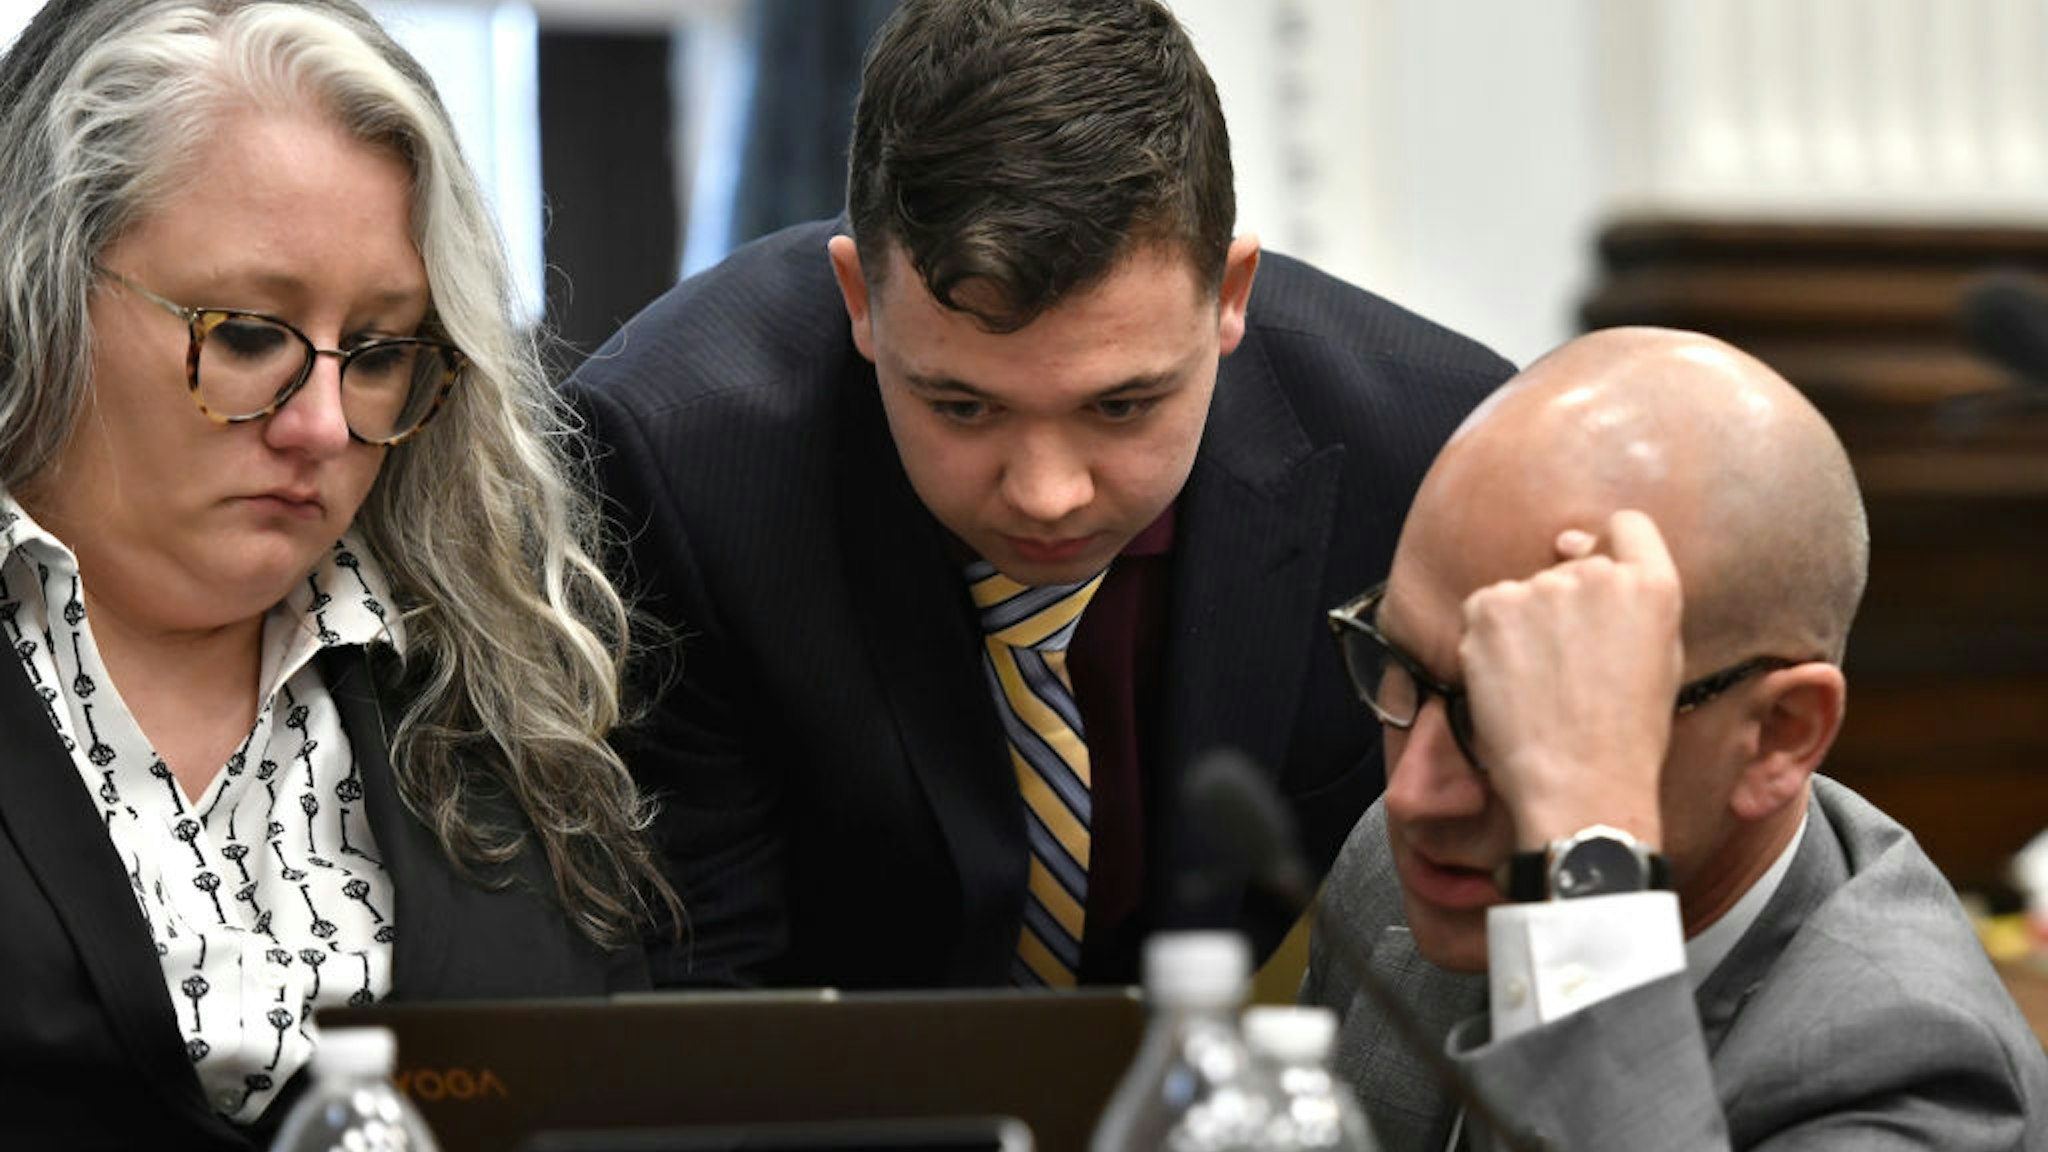 Kyle Rittenhouse, center, and his attorneys Natalie Wisco, left, and Corey Chirafisi look closely at a computer screen during his trial at the Kenosha County Courthouse on November 11, 2021 in Kenosha, Wisconsin.